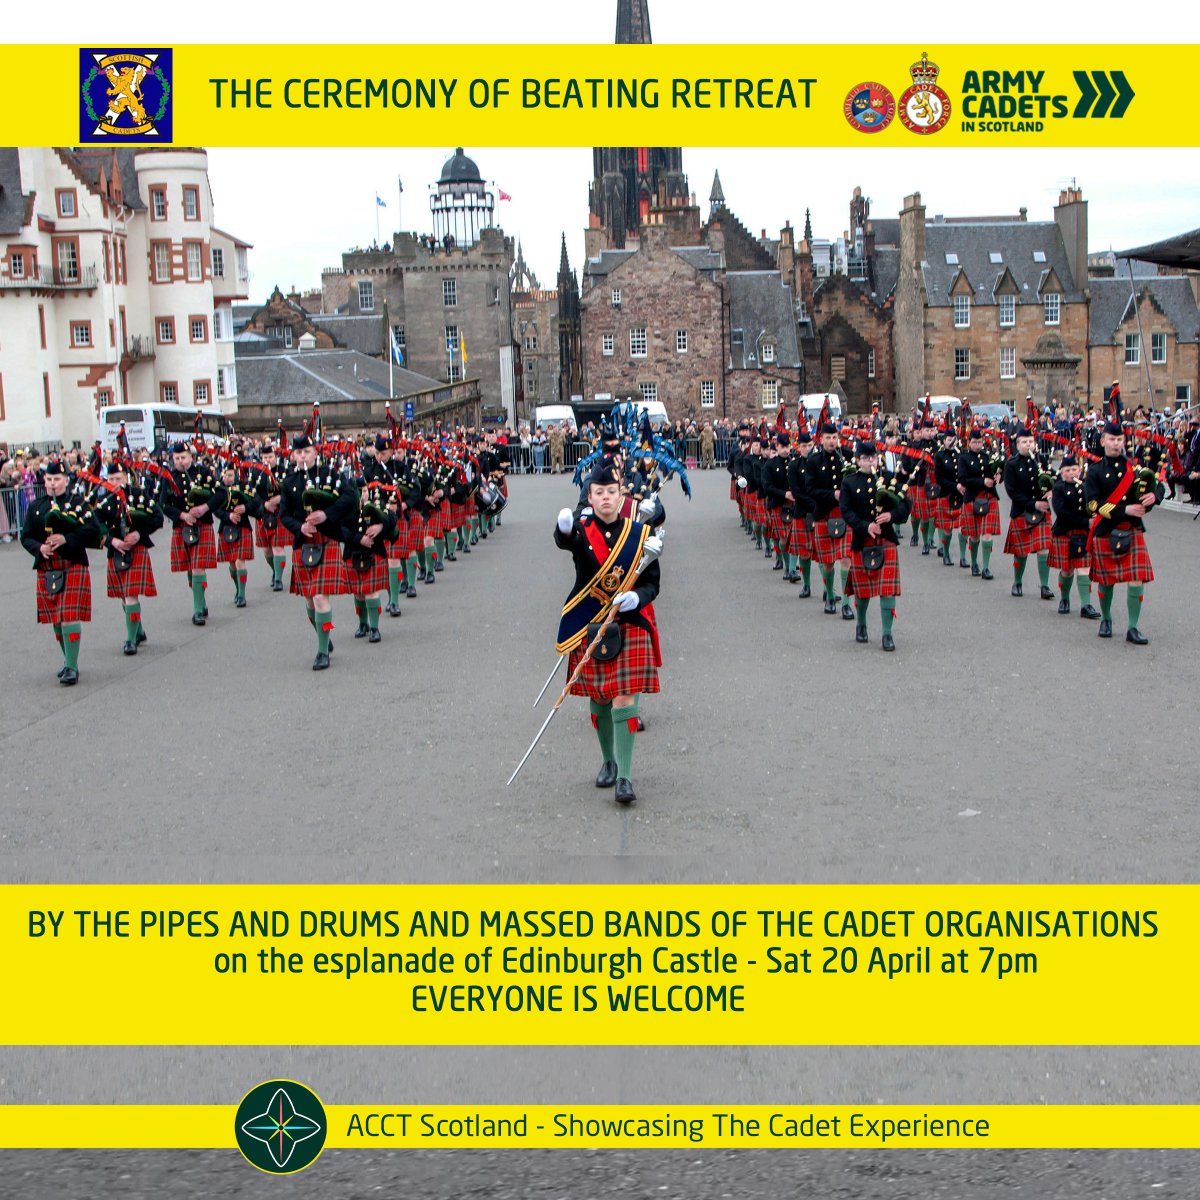 The Ceremony of Beating Retreat #ArmyCadetsScot